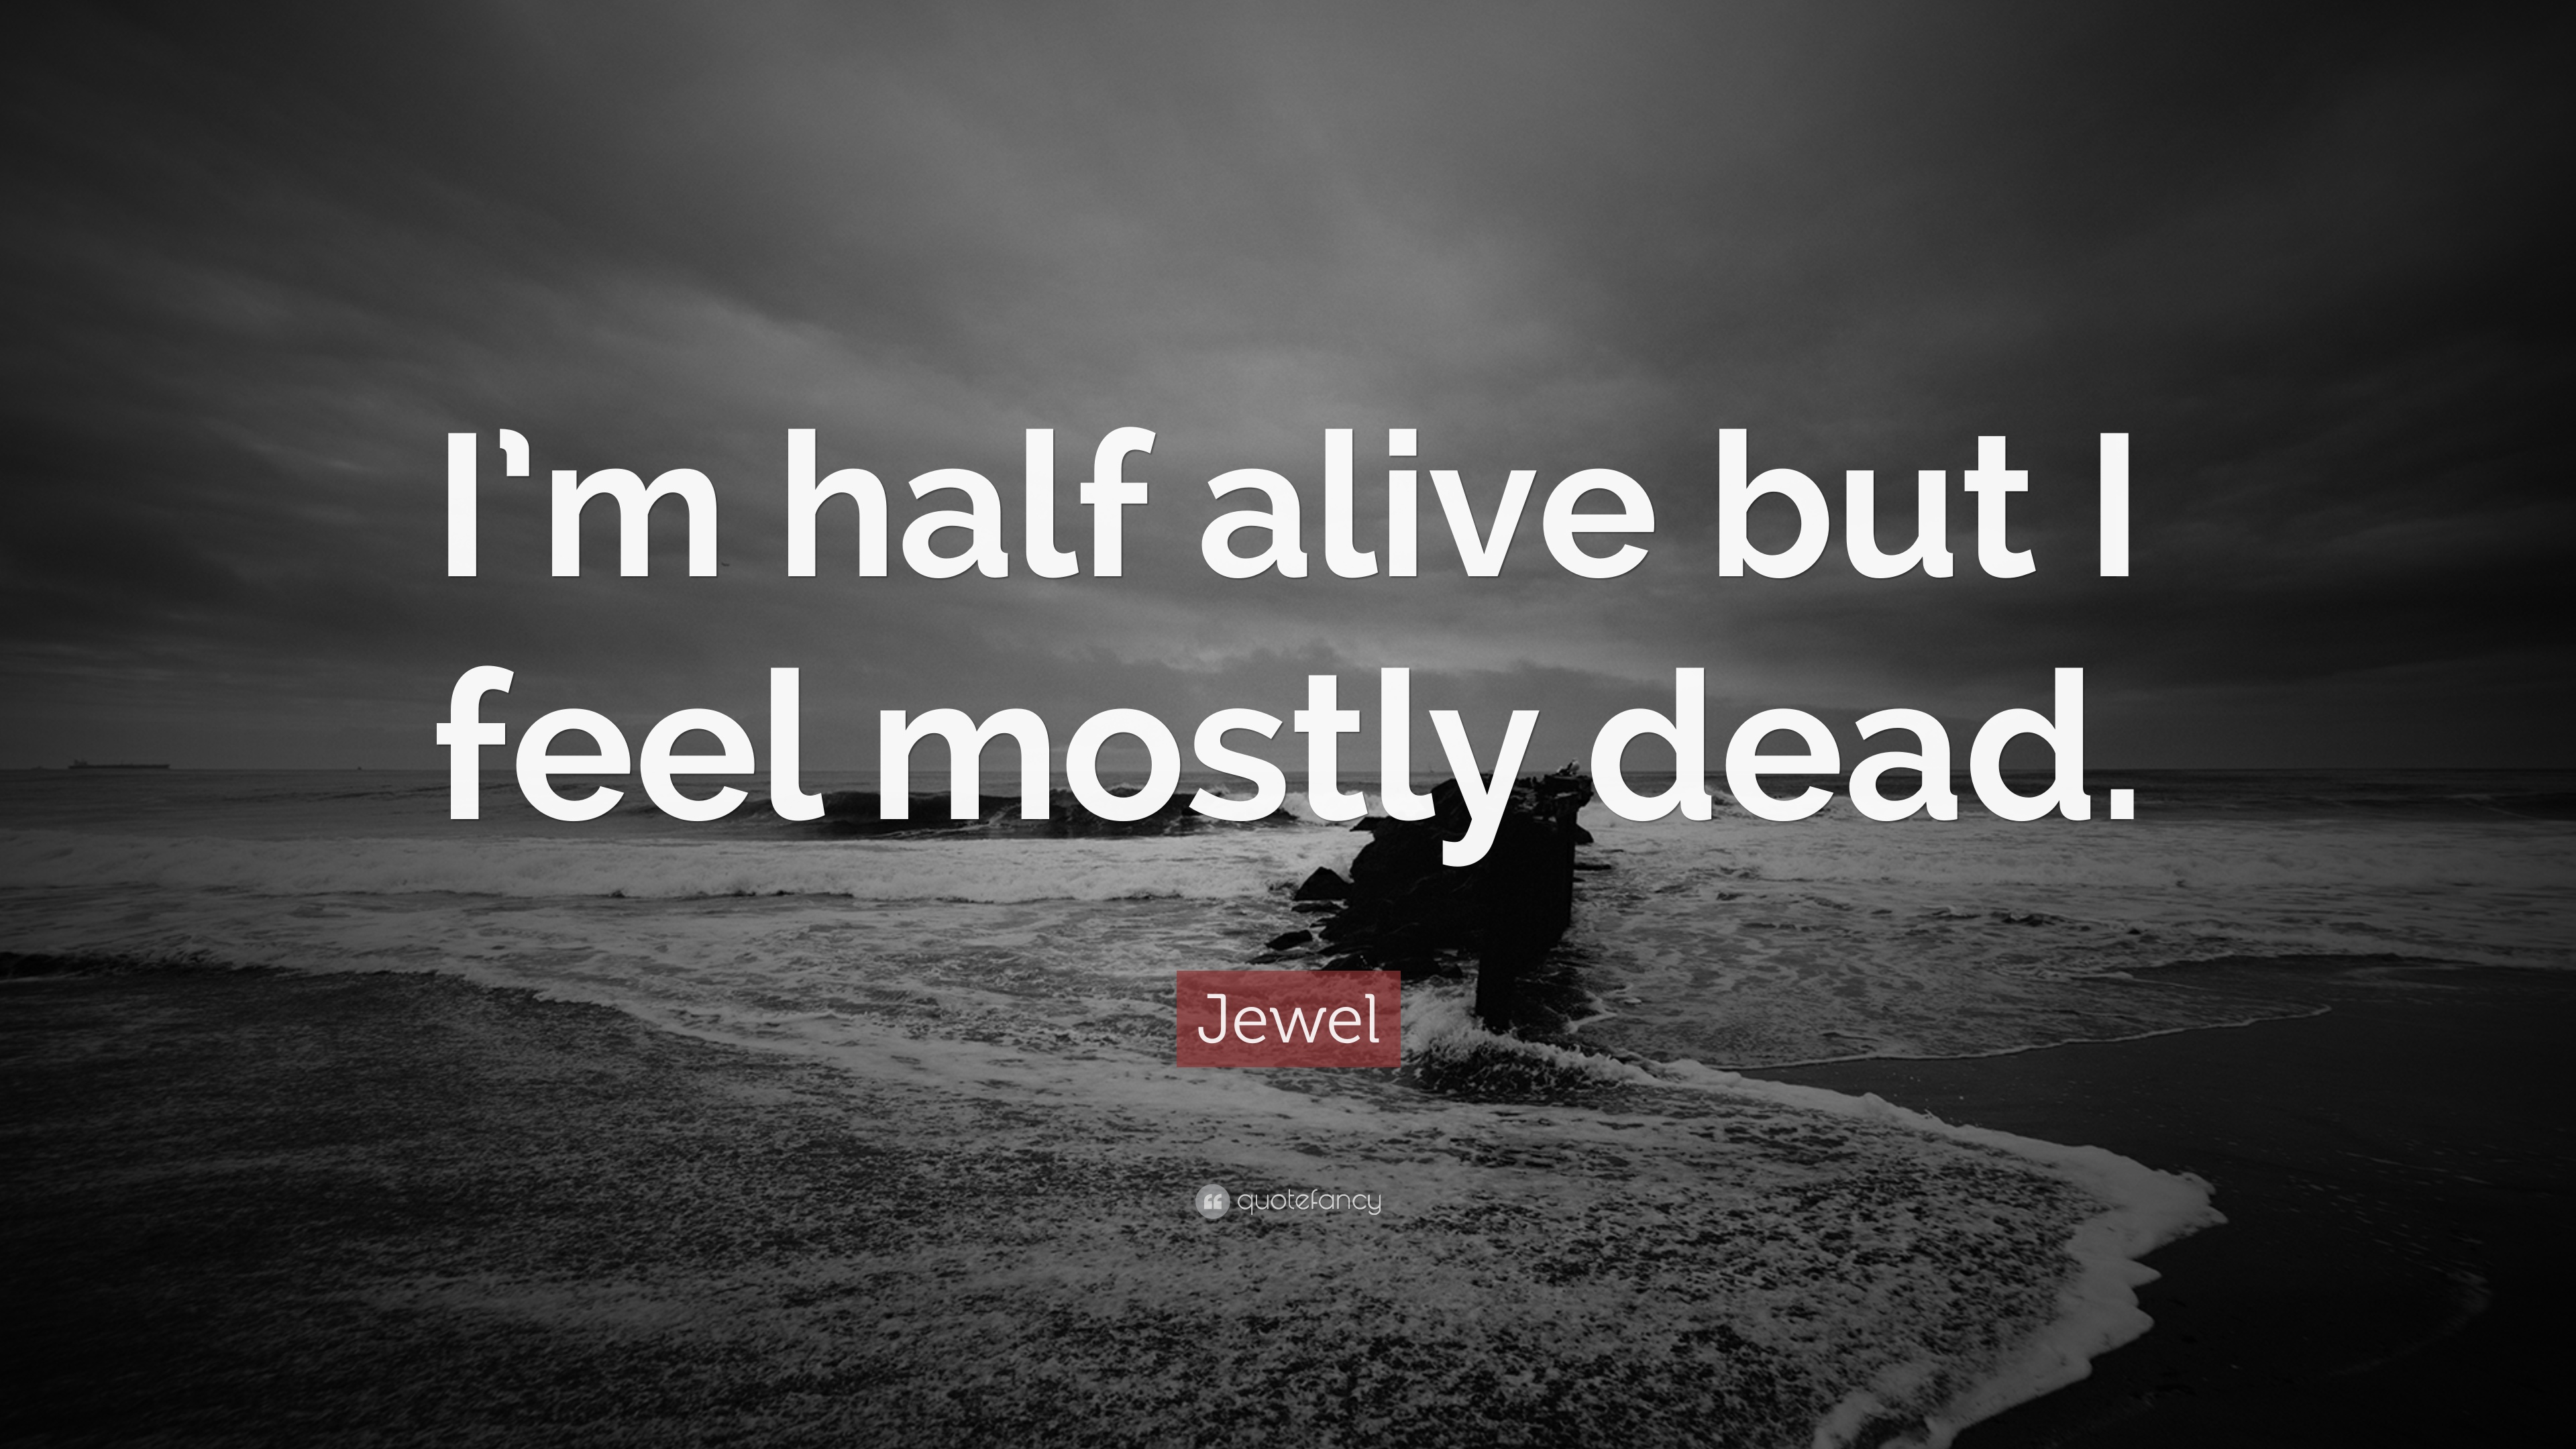 Jewel Quote: “I'm half alive but I feel mostly dead.” 19